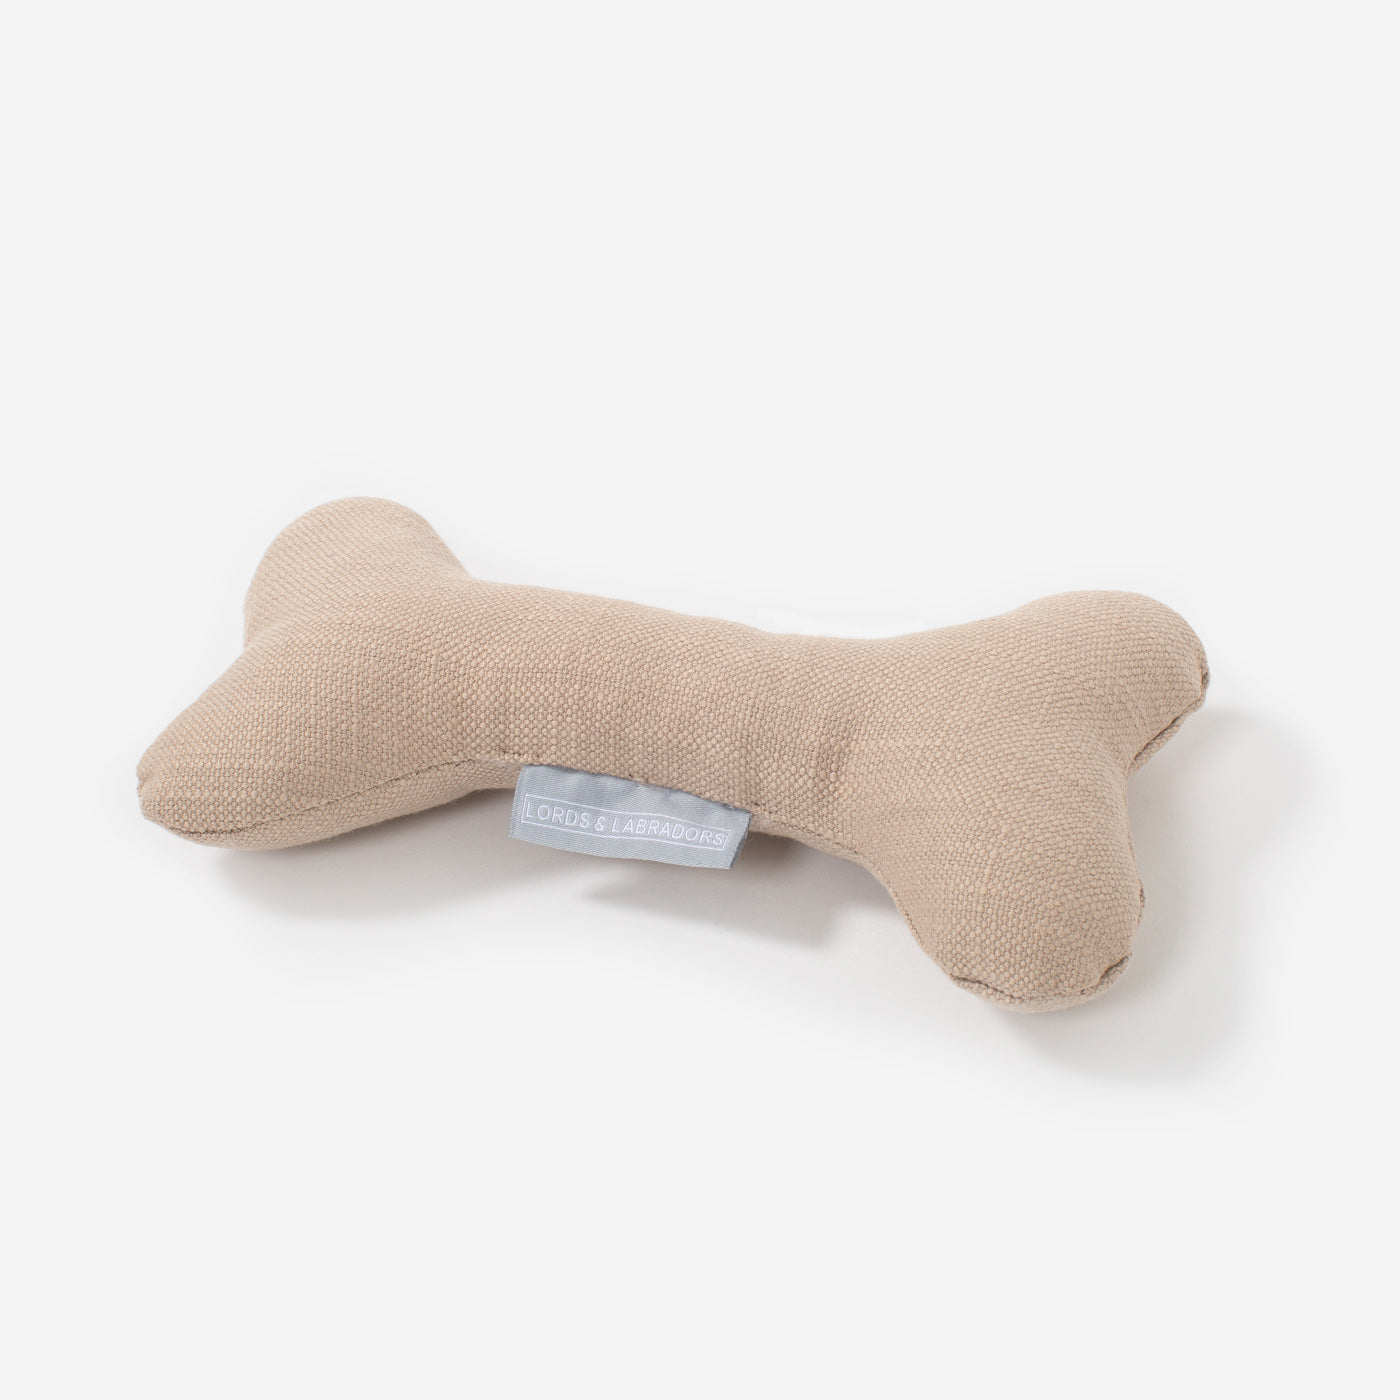 Present The Perfect Pet Playtime With Our Luxury Dog Bone Toy, In Stunning Savanna Oatmeal! Available To Personalize Now at Lords & Labradors US